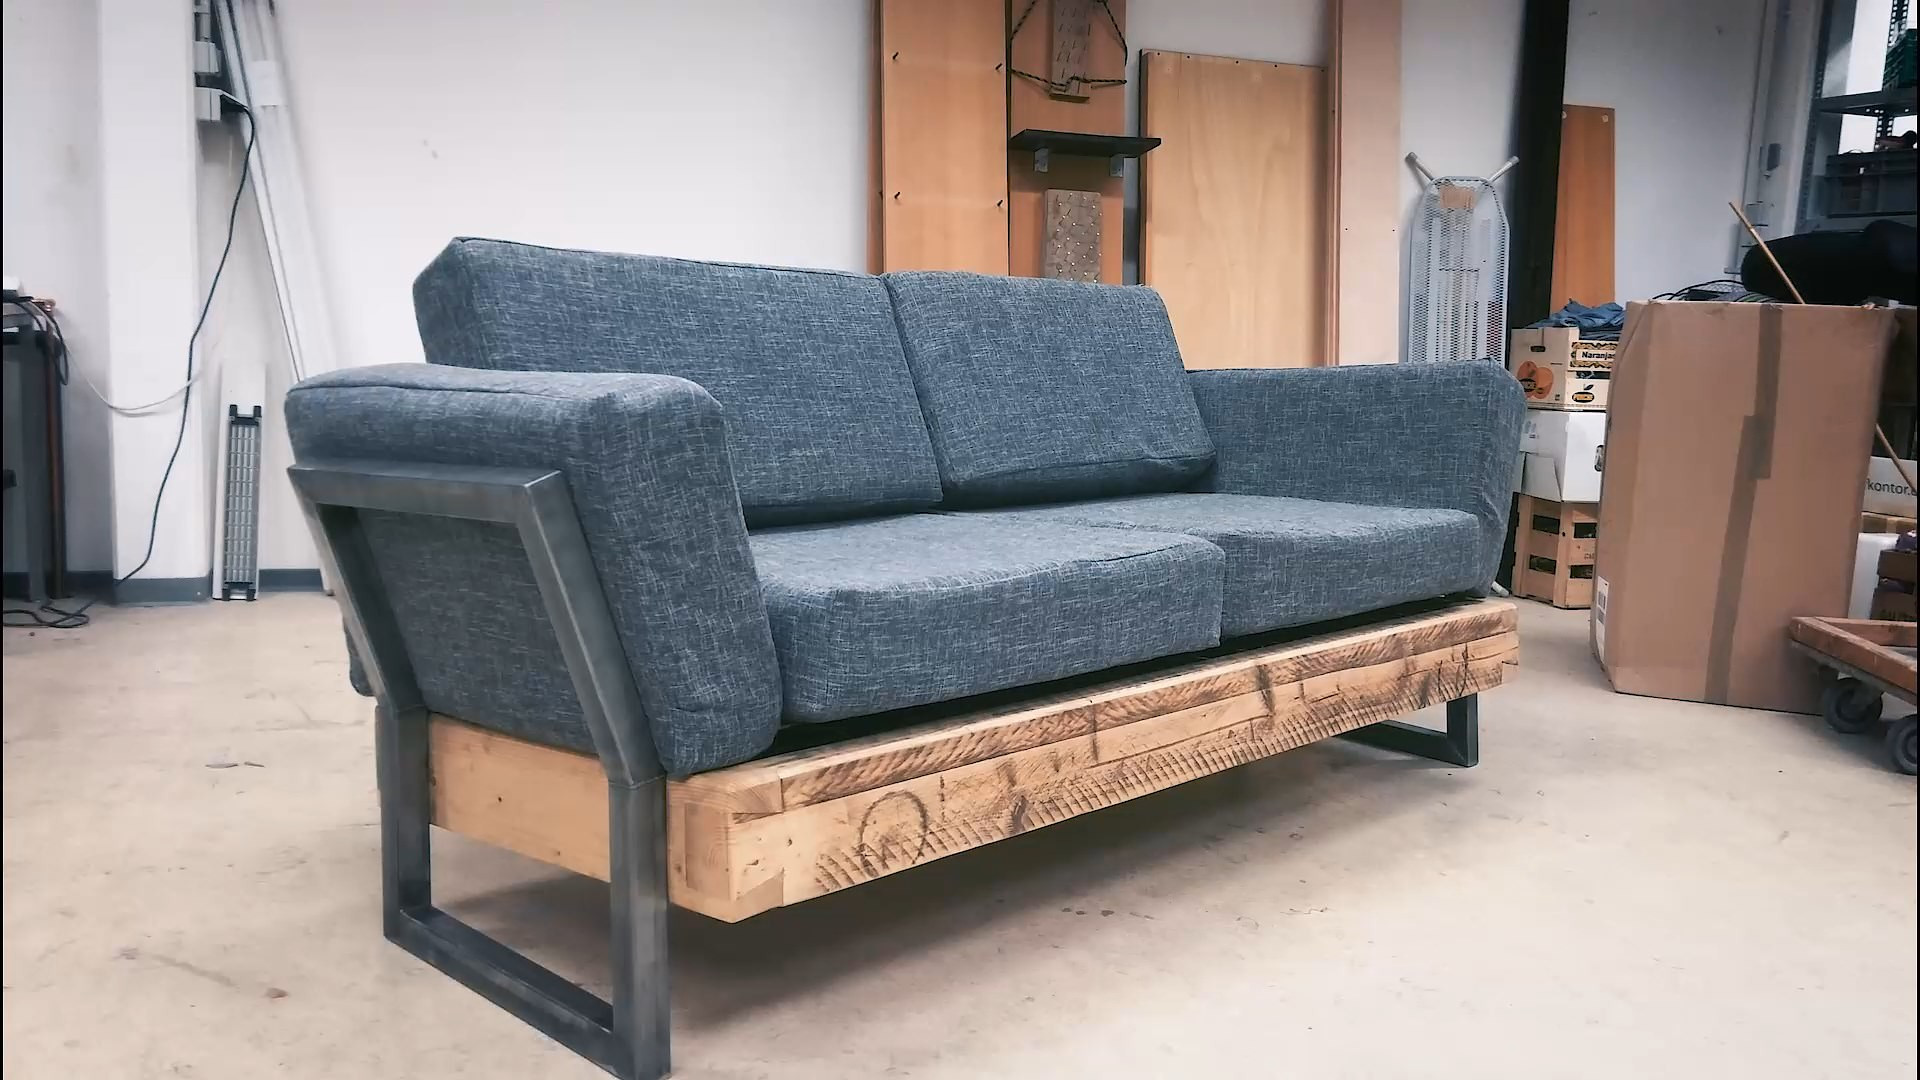 Sofa Diy
 From Trash to Treasure How e Redditor Turned Old